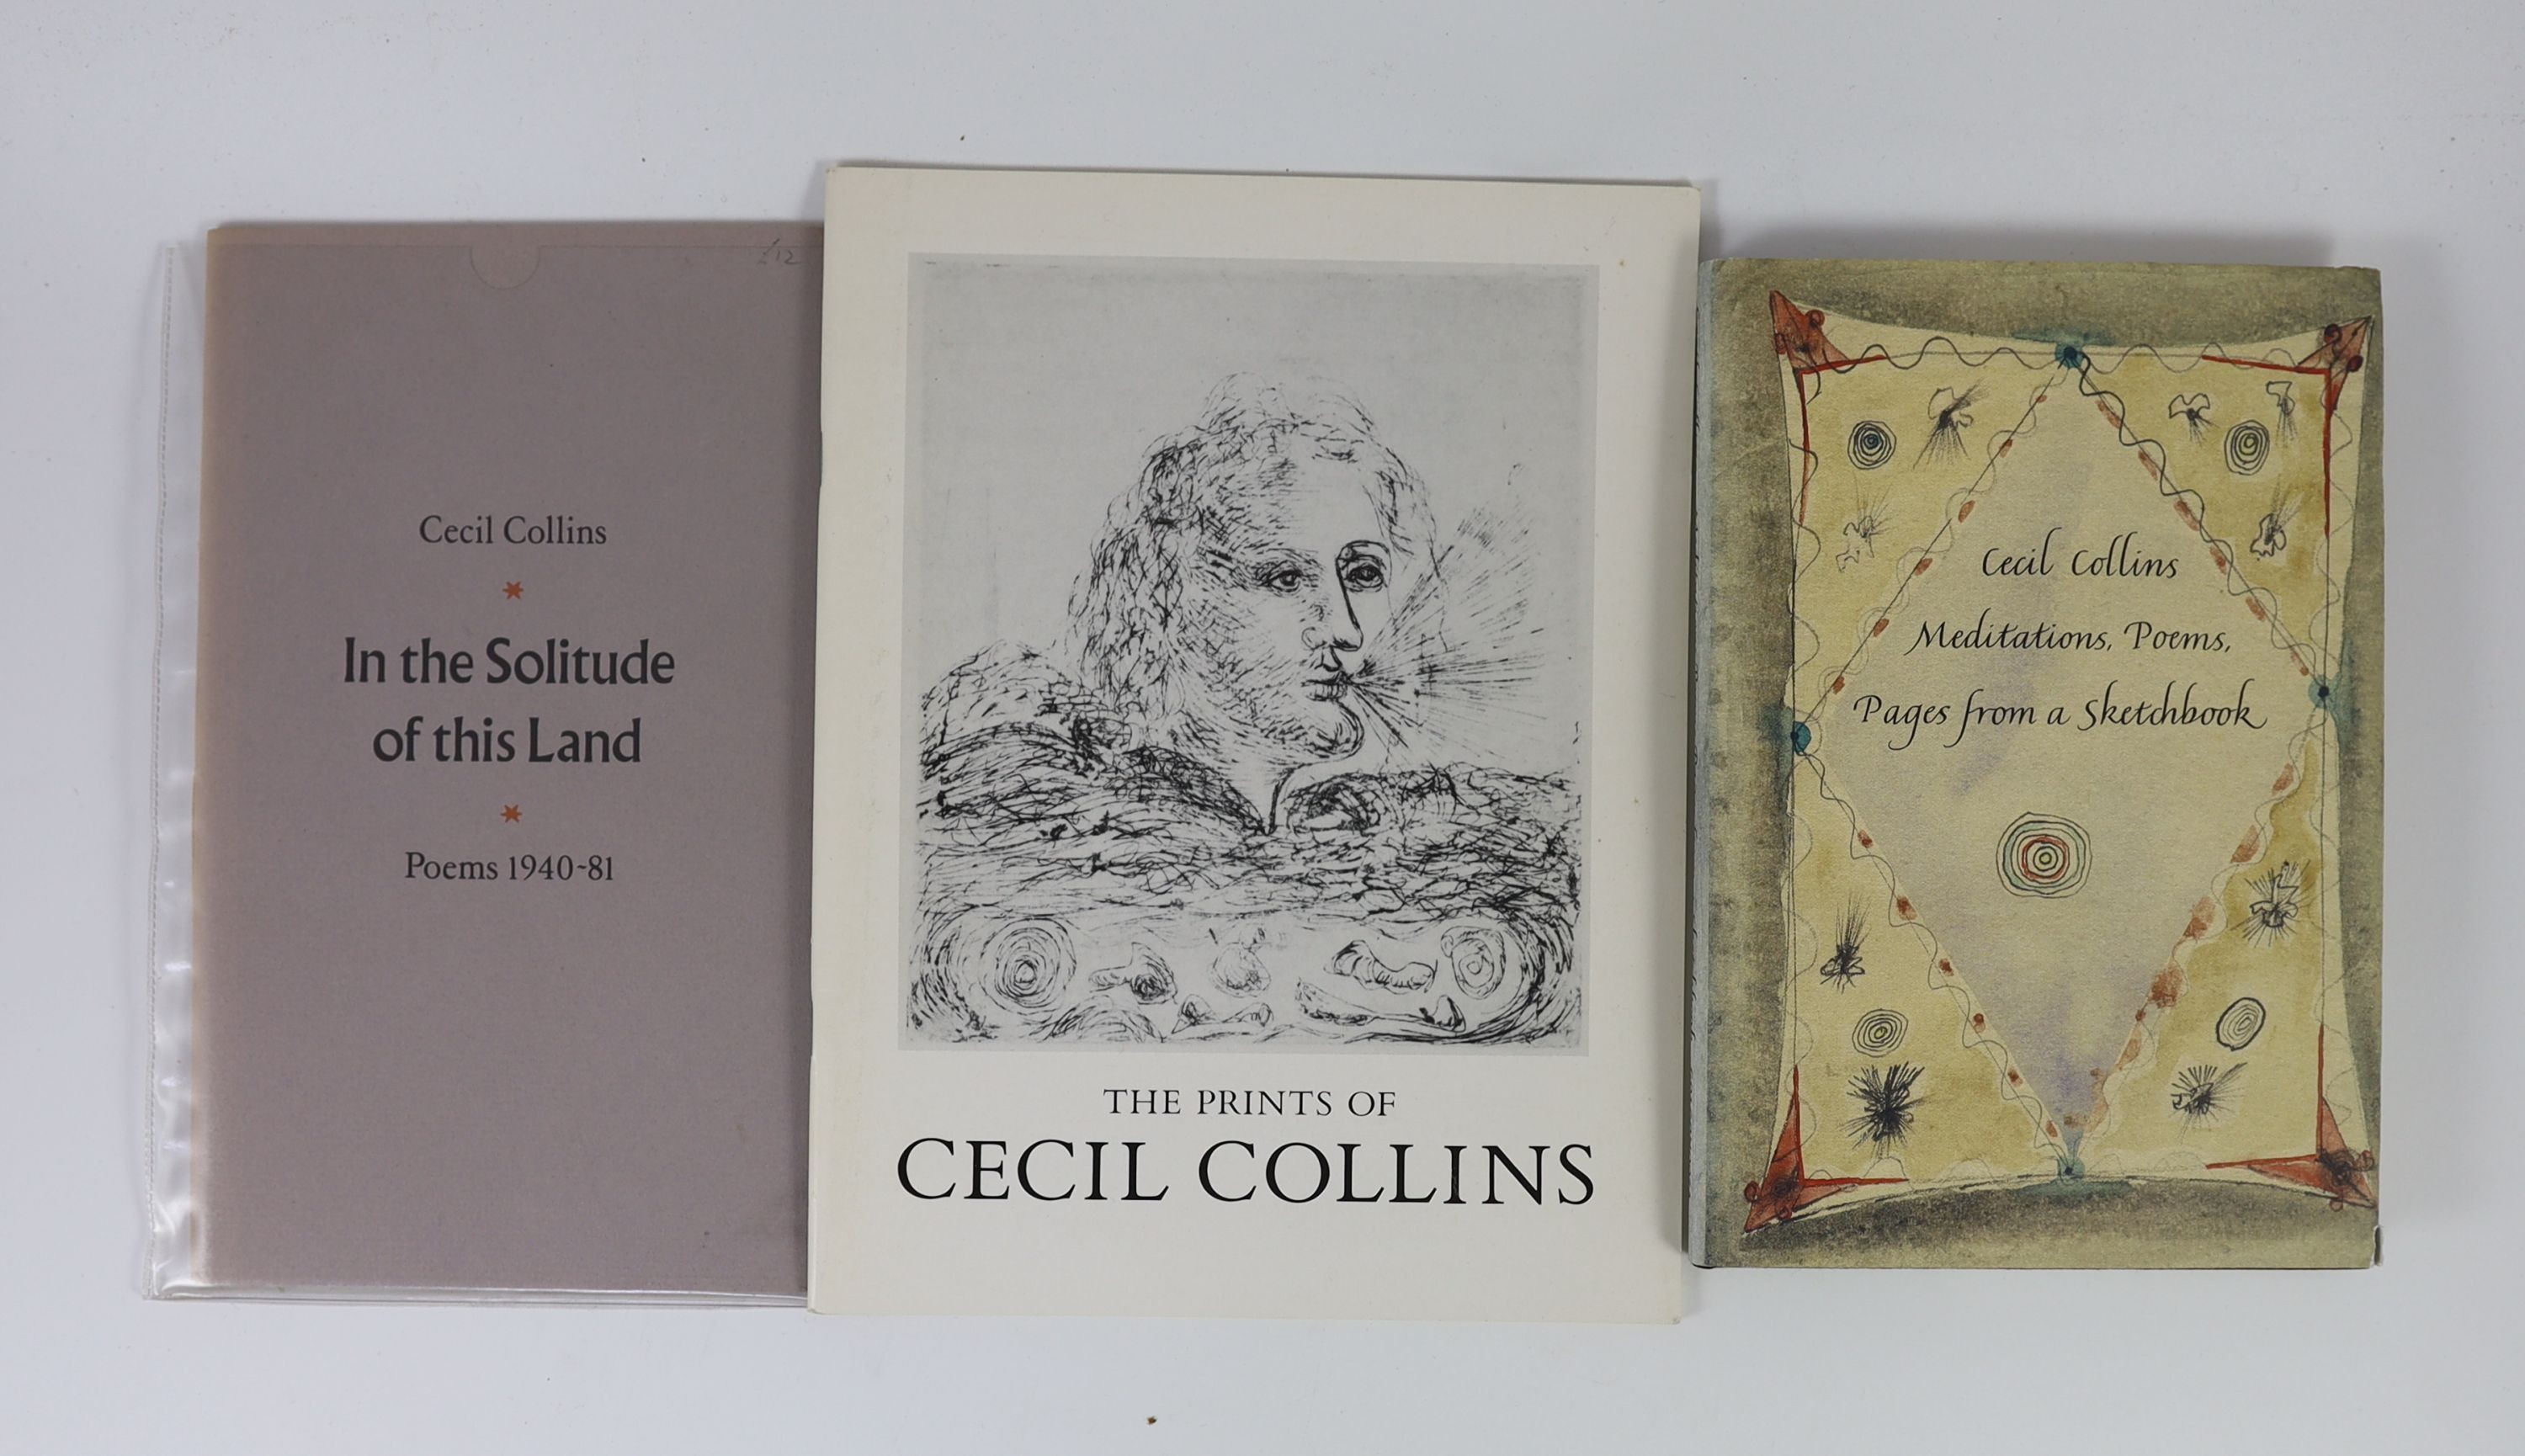 Collins, Cecil - In the Solitude of this Land. 1st and limited ed. 1 of 100. Complete with autolithograph frontispiece signed in pencil by the author. Printed paper wrappers. 8vo. Golgonooza Press, Ipswich, 1981; Morphet